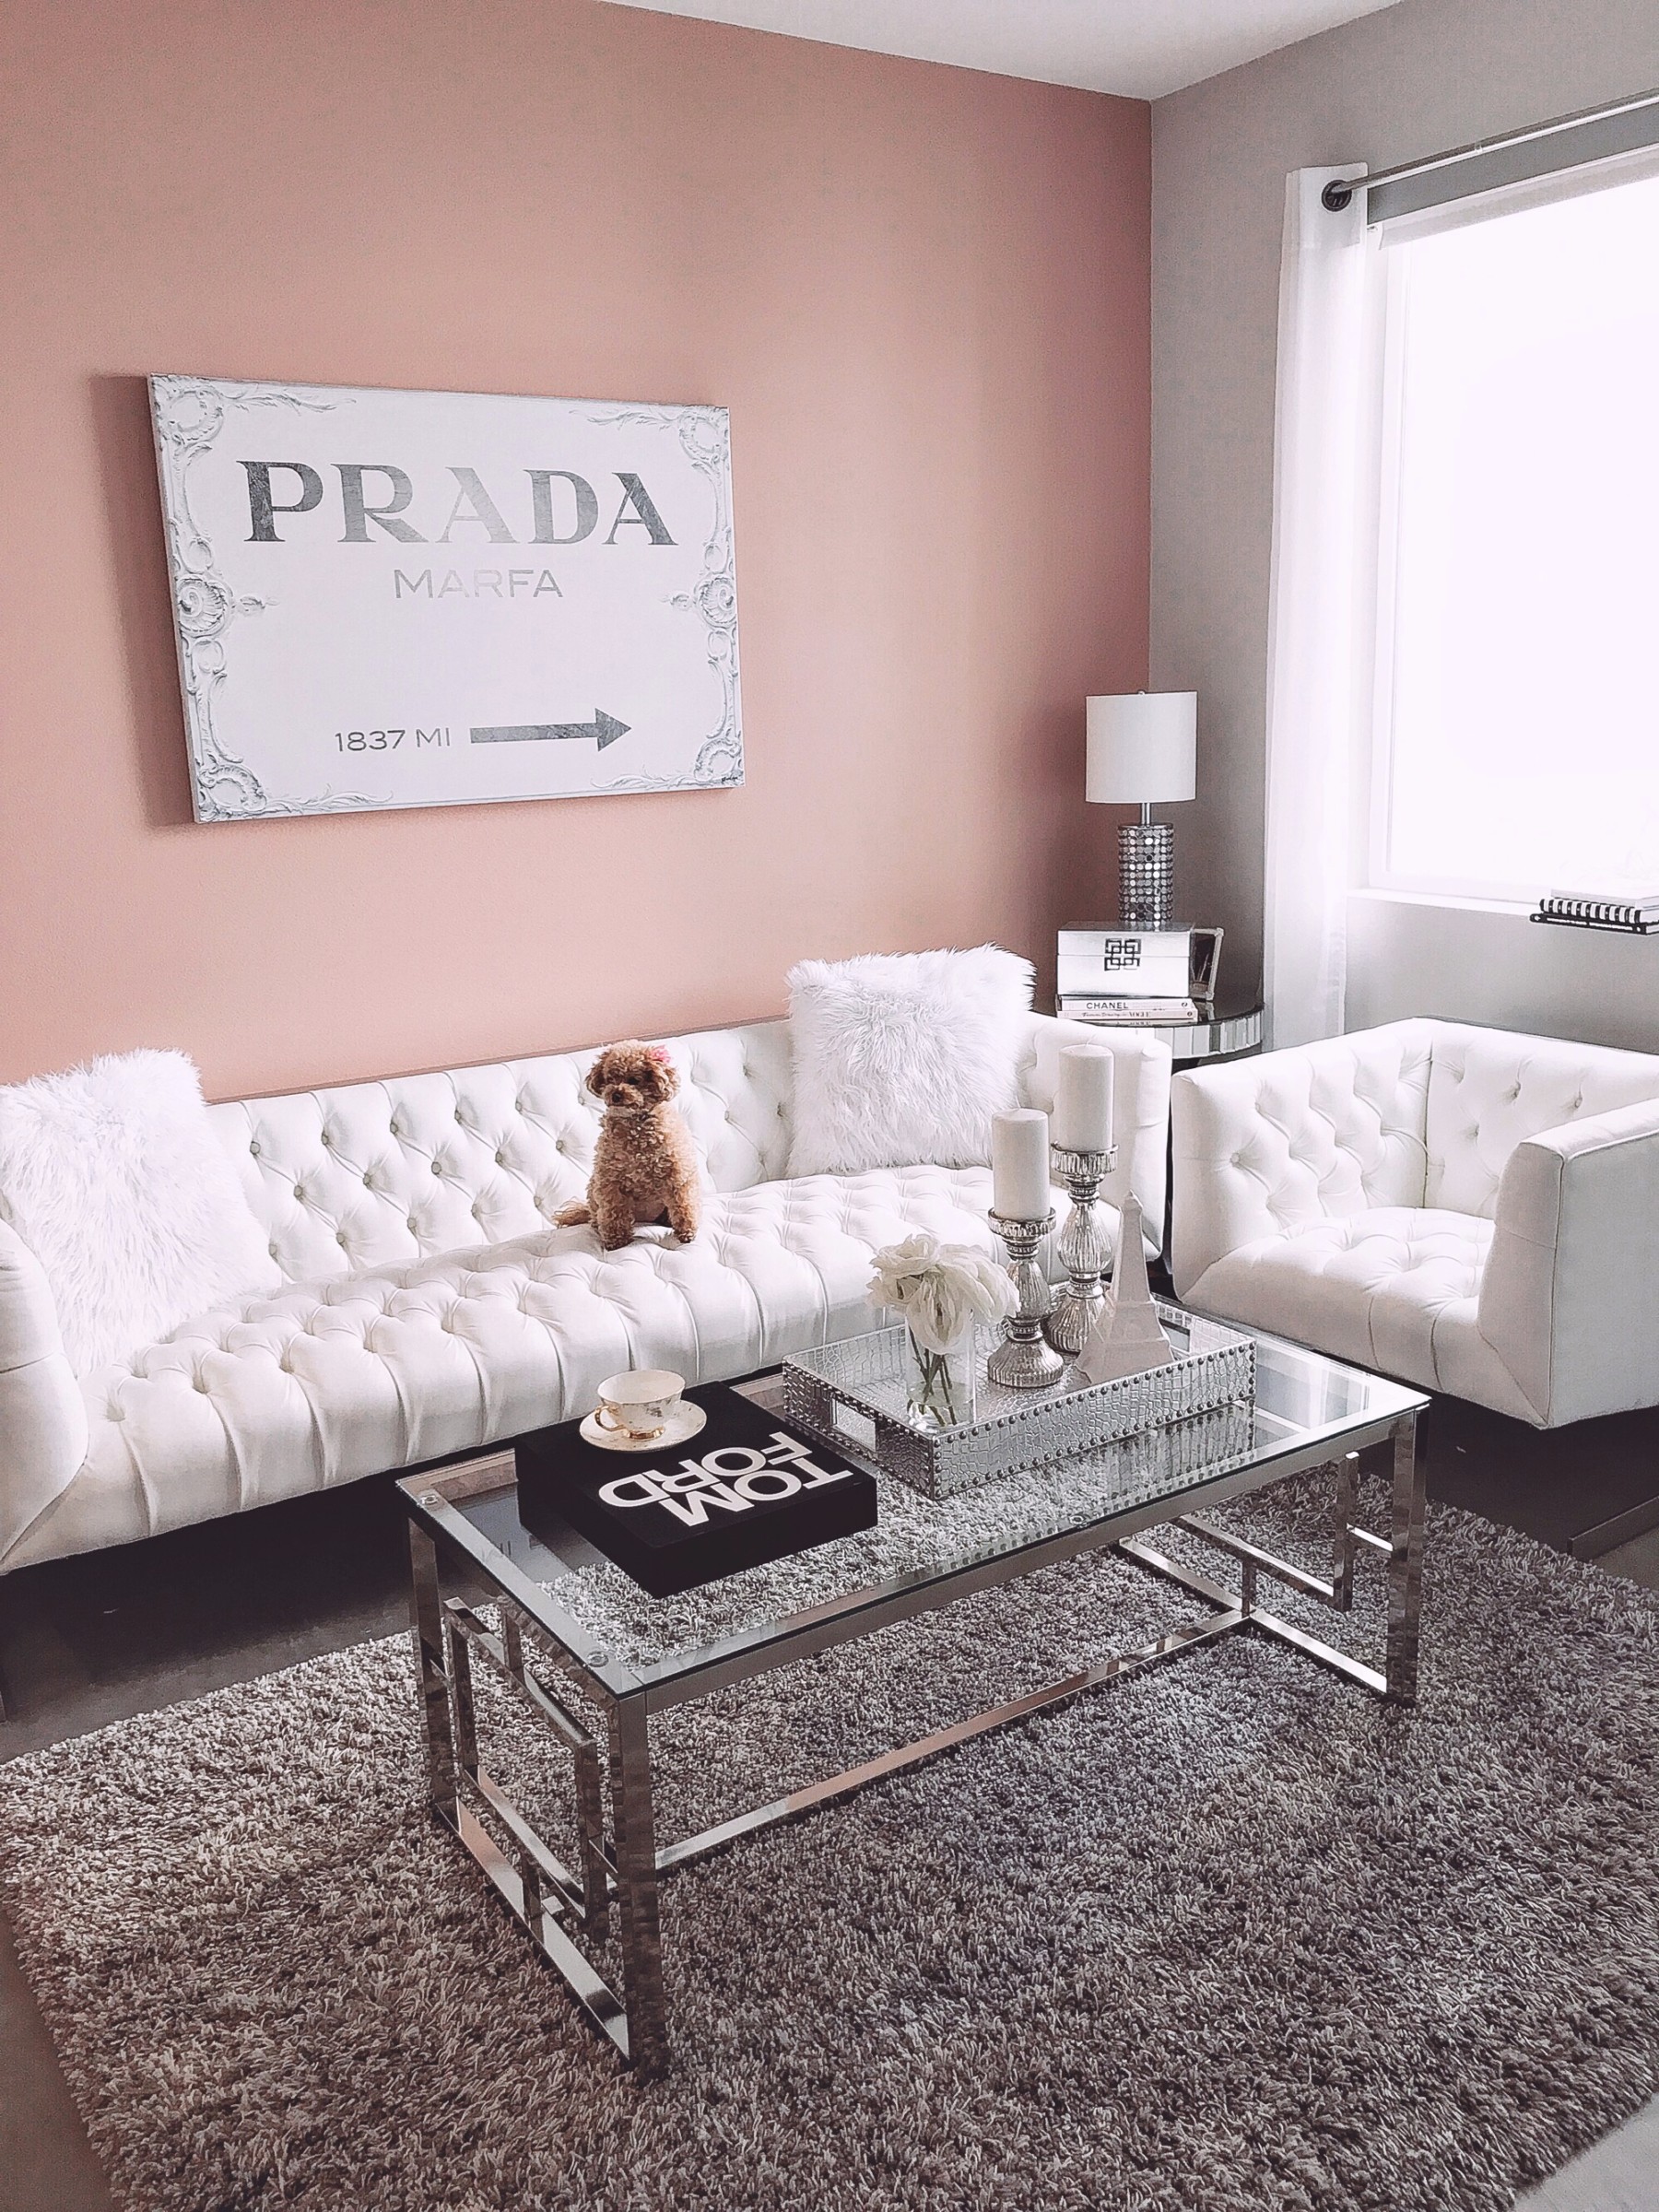 Blondie in the City | Pink, Grey, & White Living Room Decor, Prada Marfa, Tom Ford Book